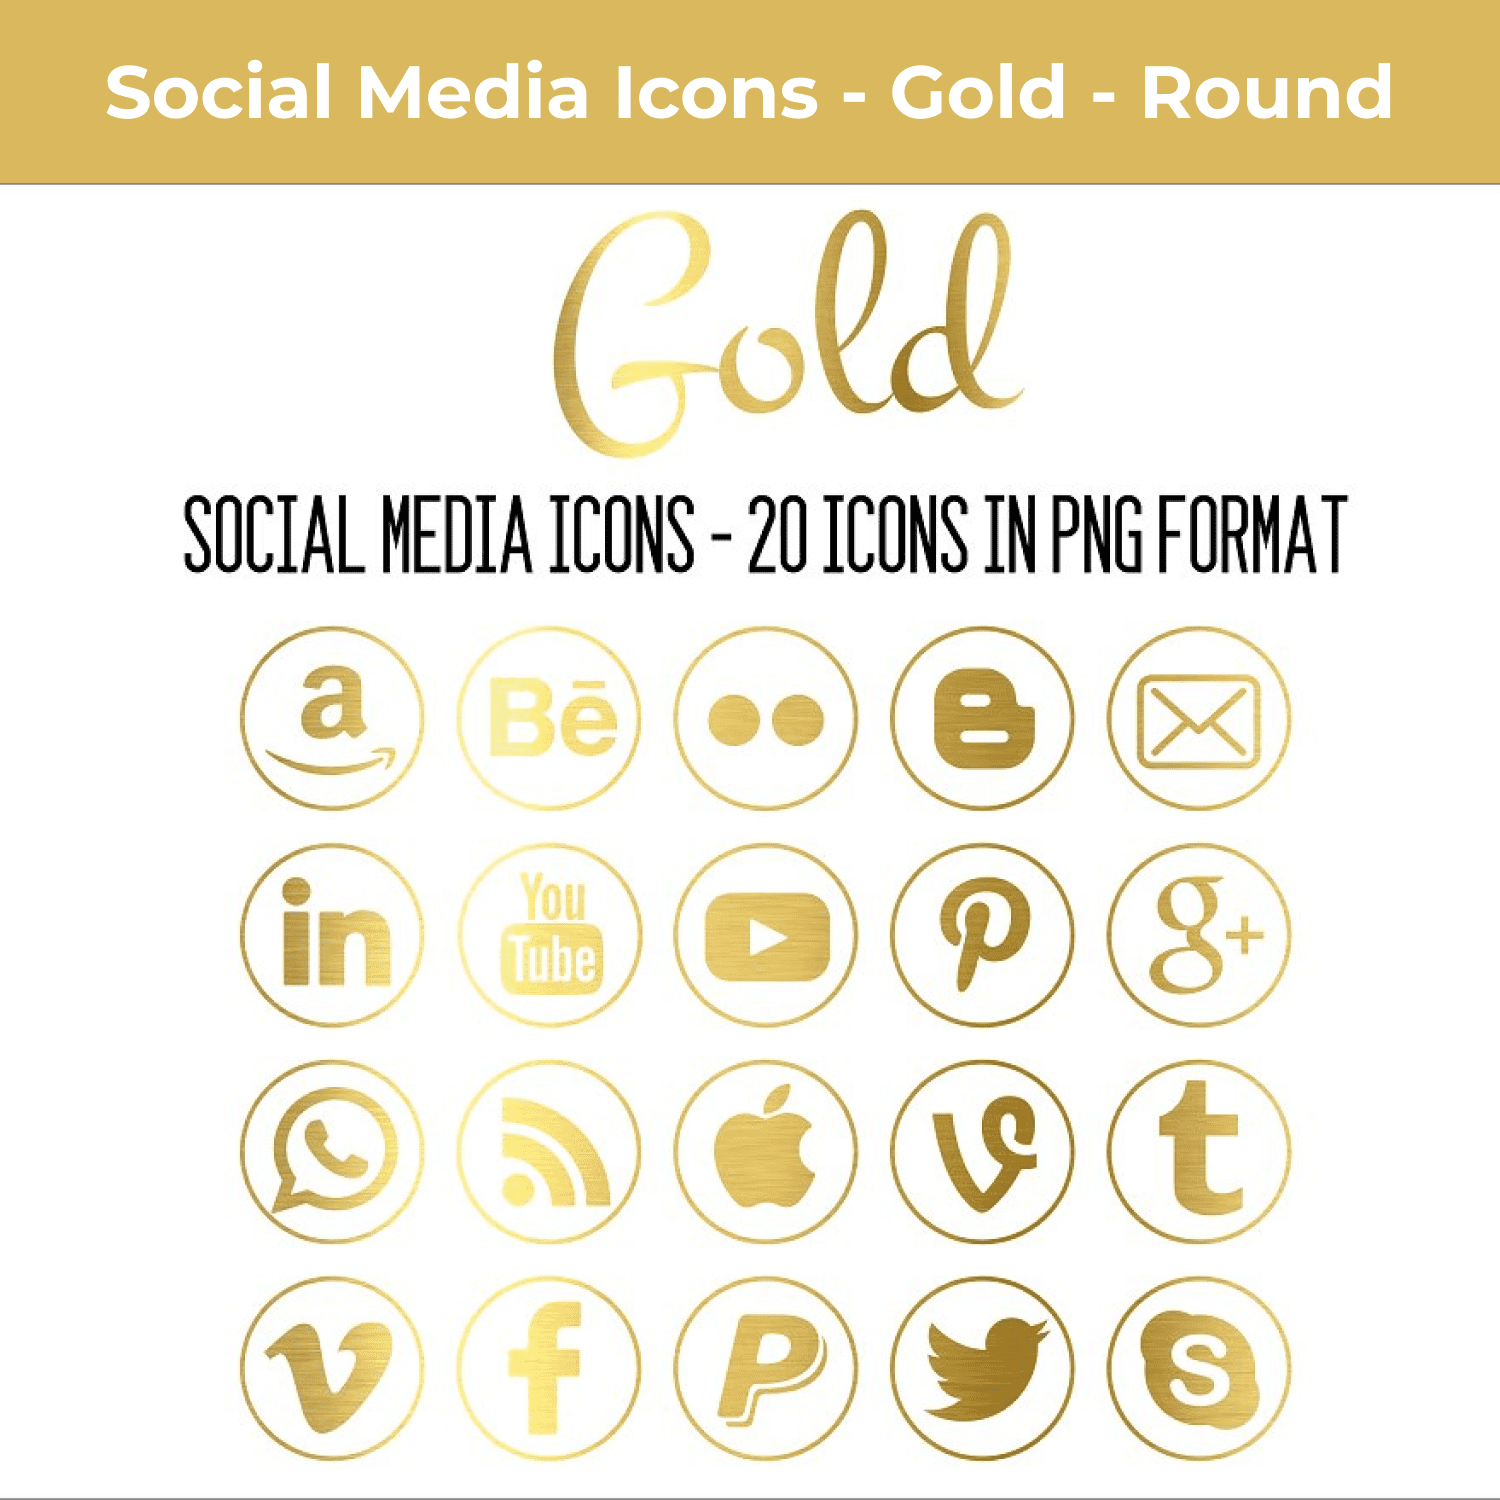 Gold Round Social Media Icons main cover.